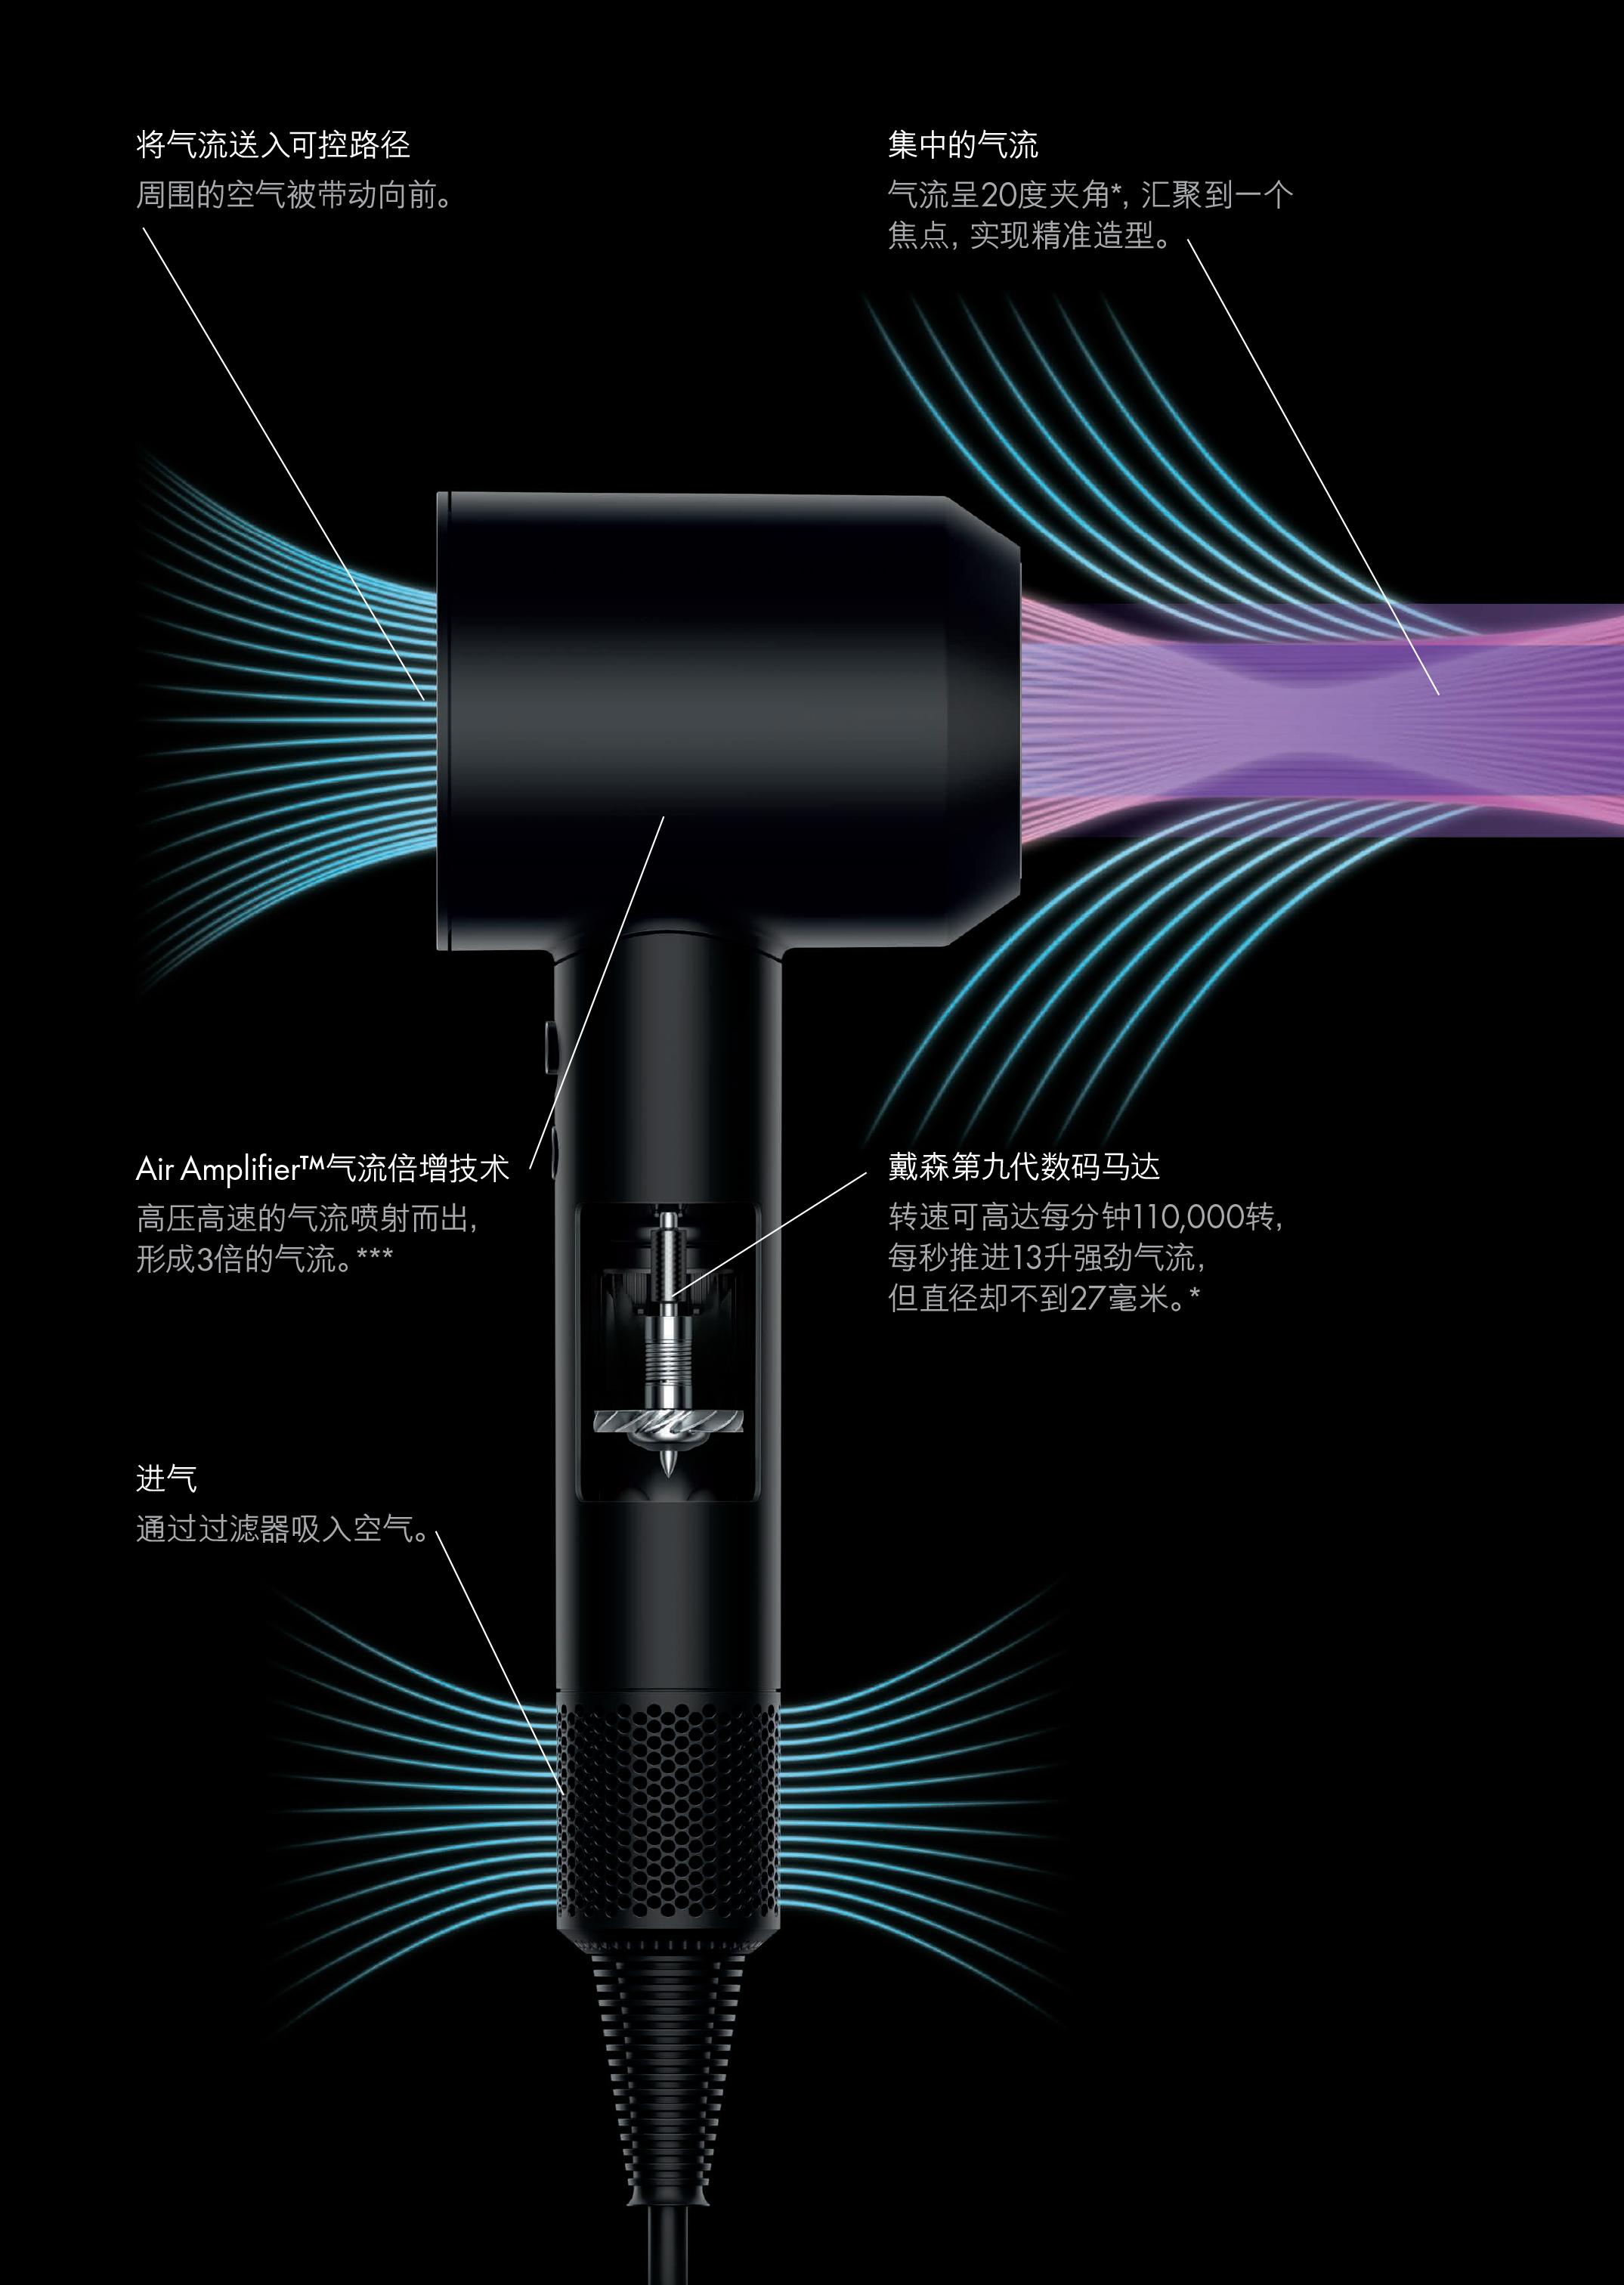 Dyson Supersonic™ 新一代吹风机